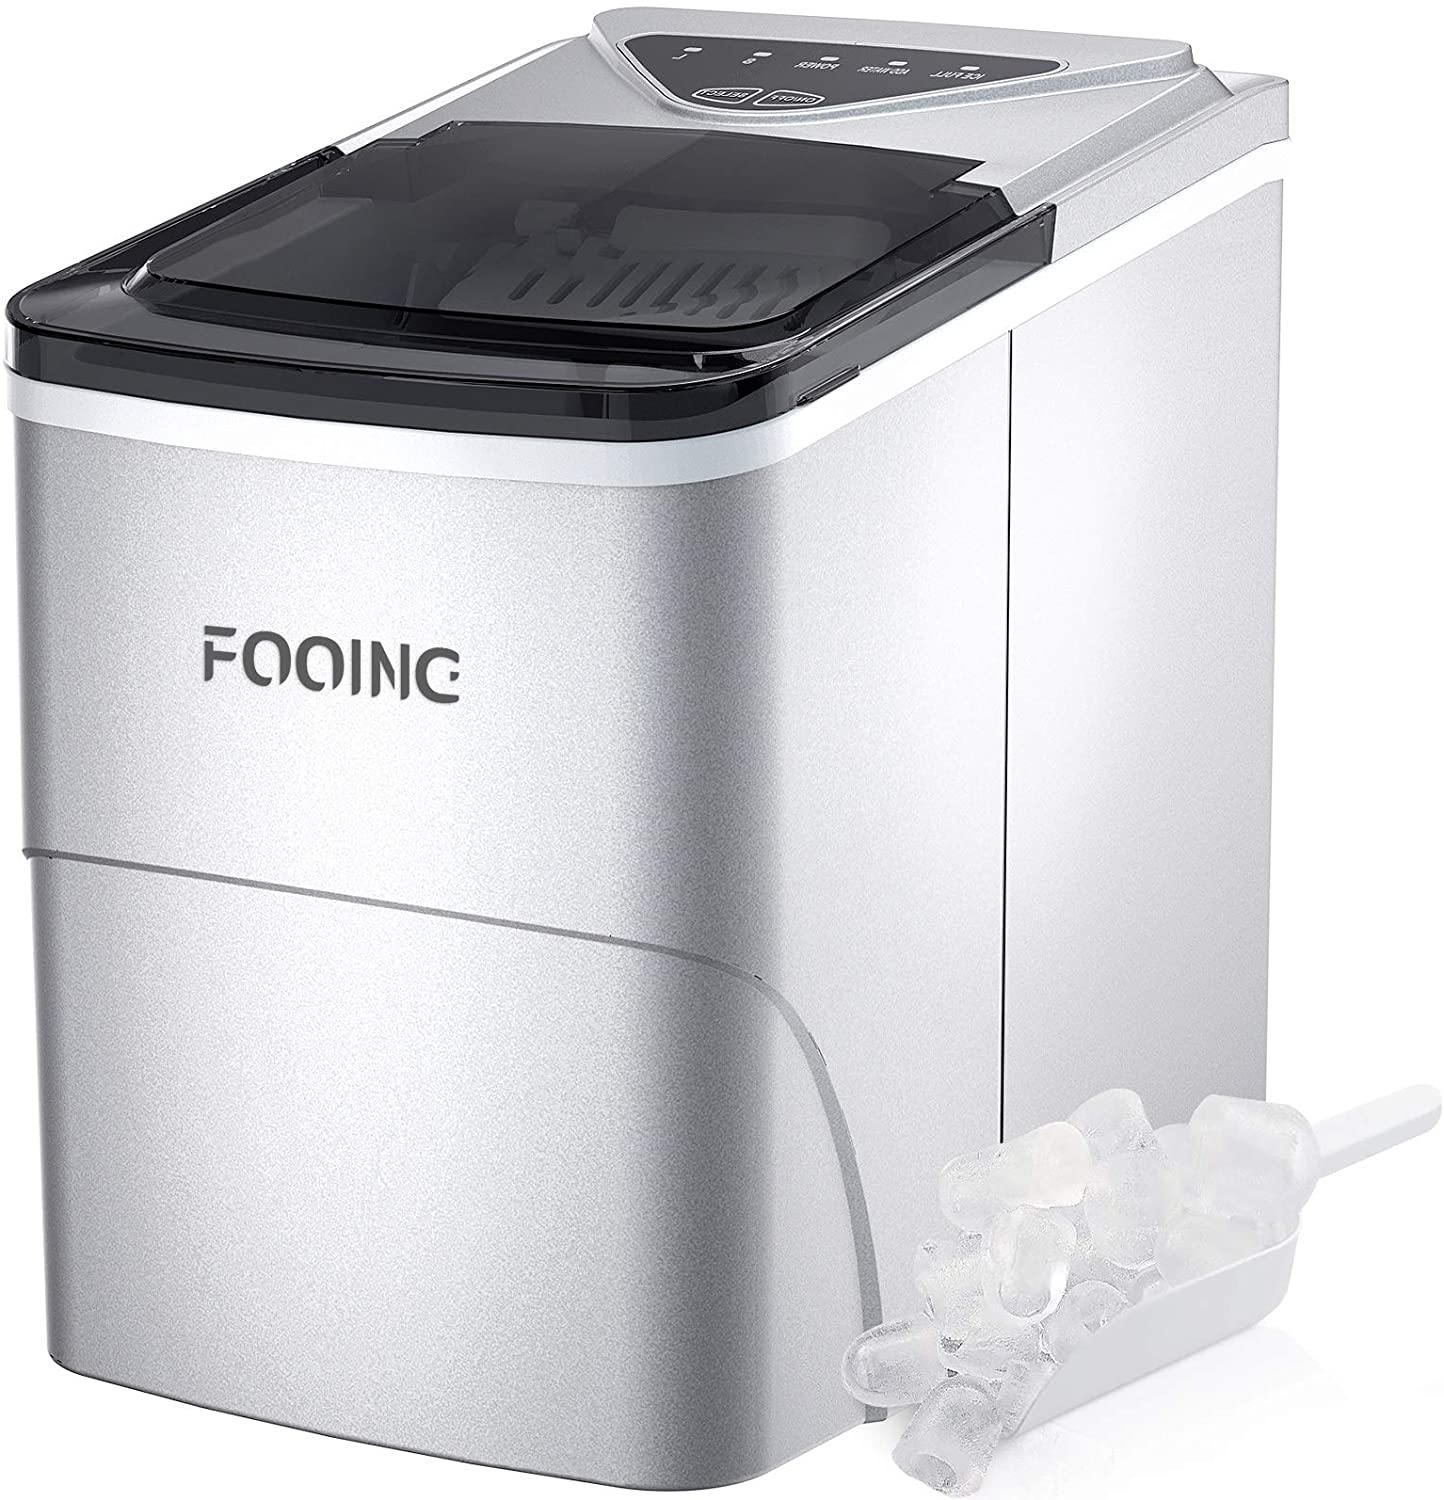 FOOING Ice Maker